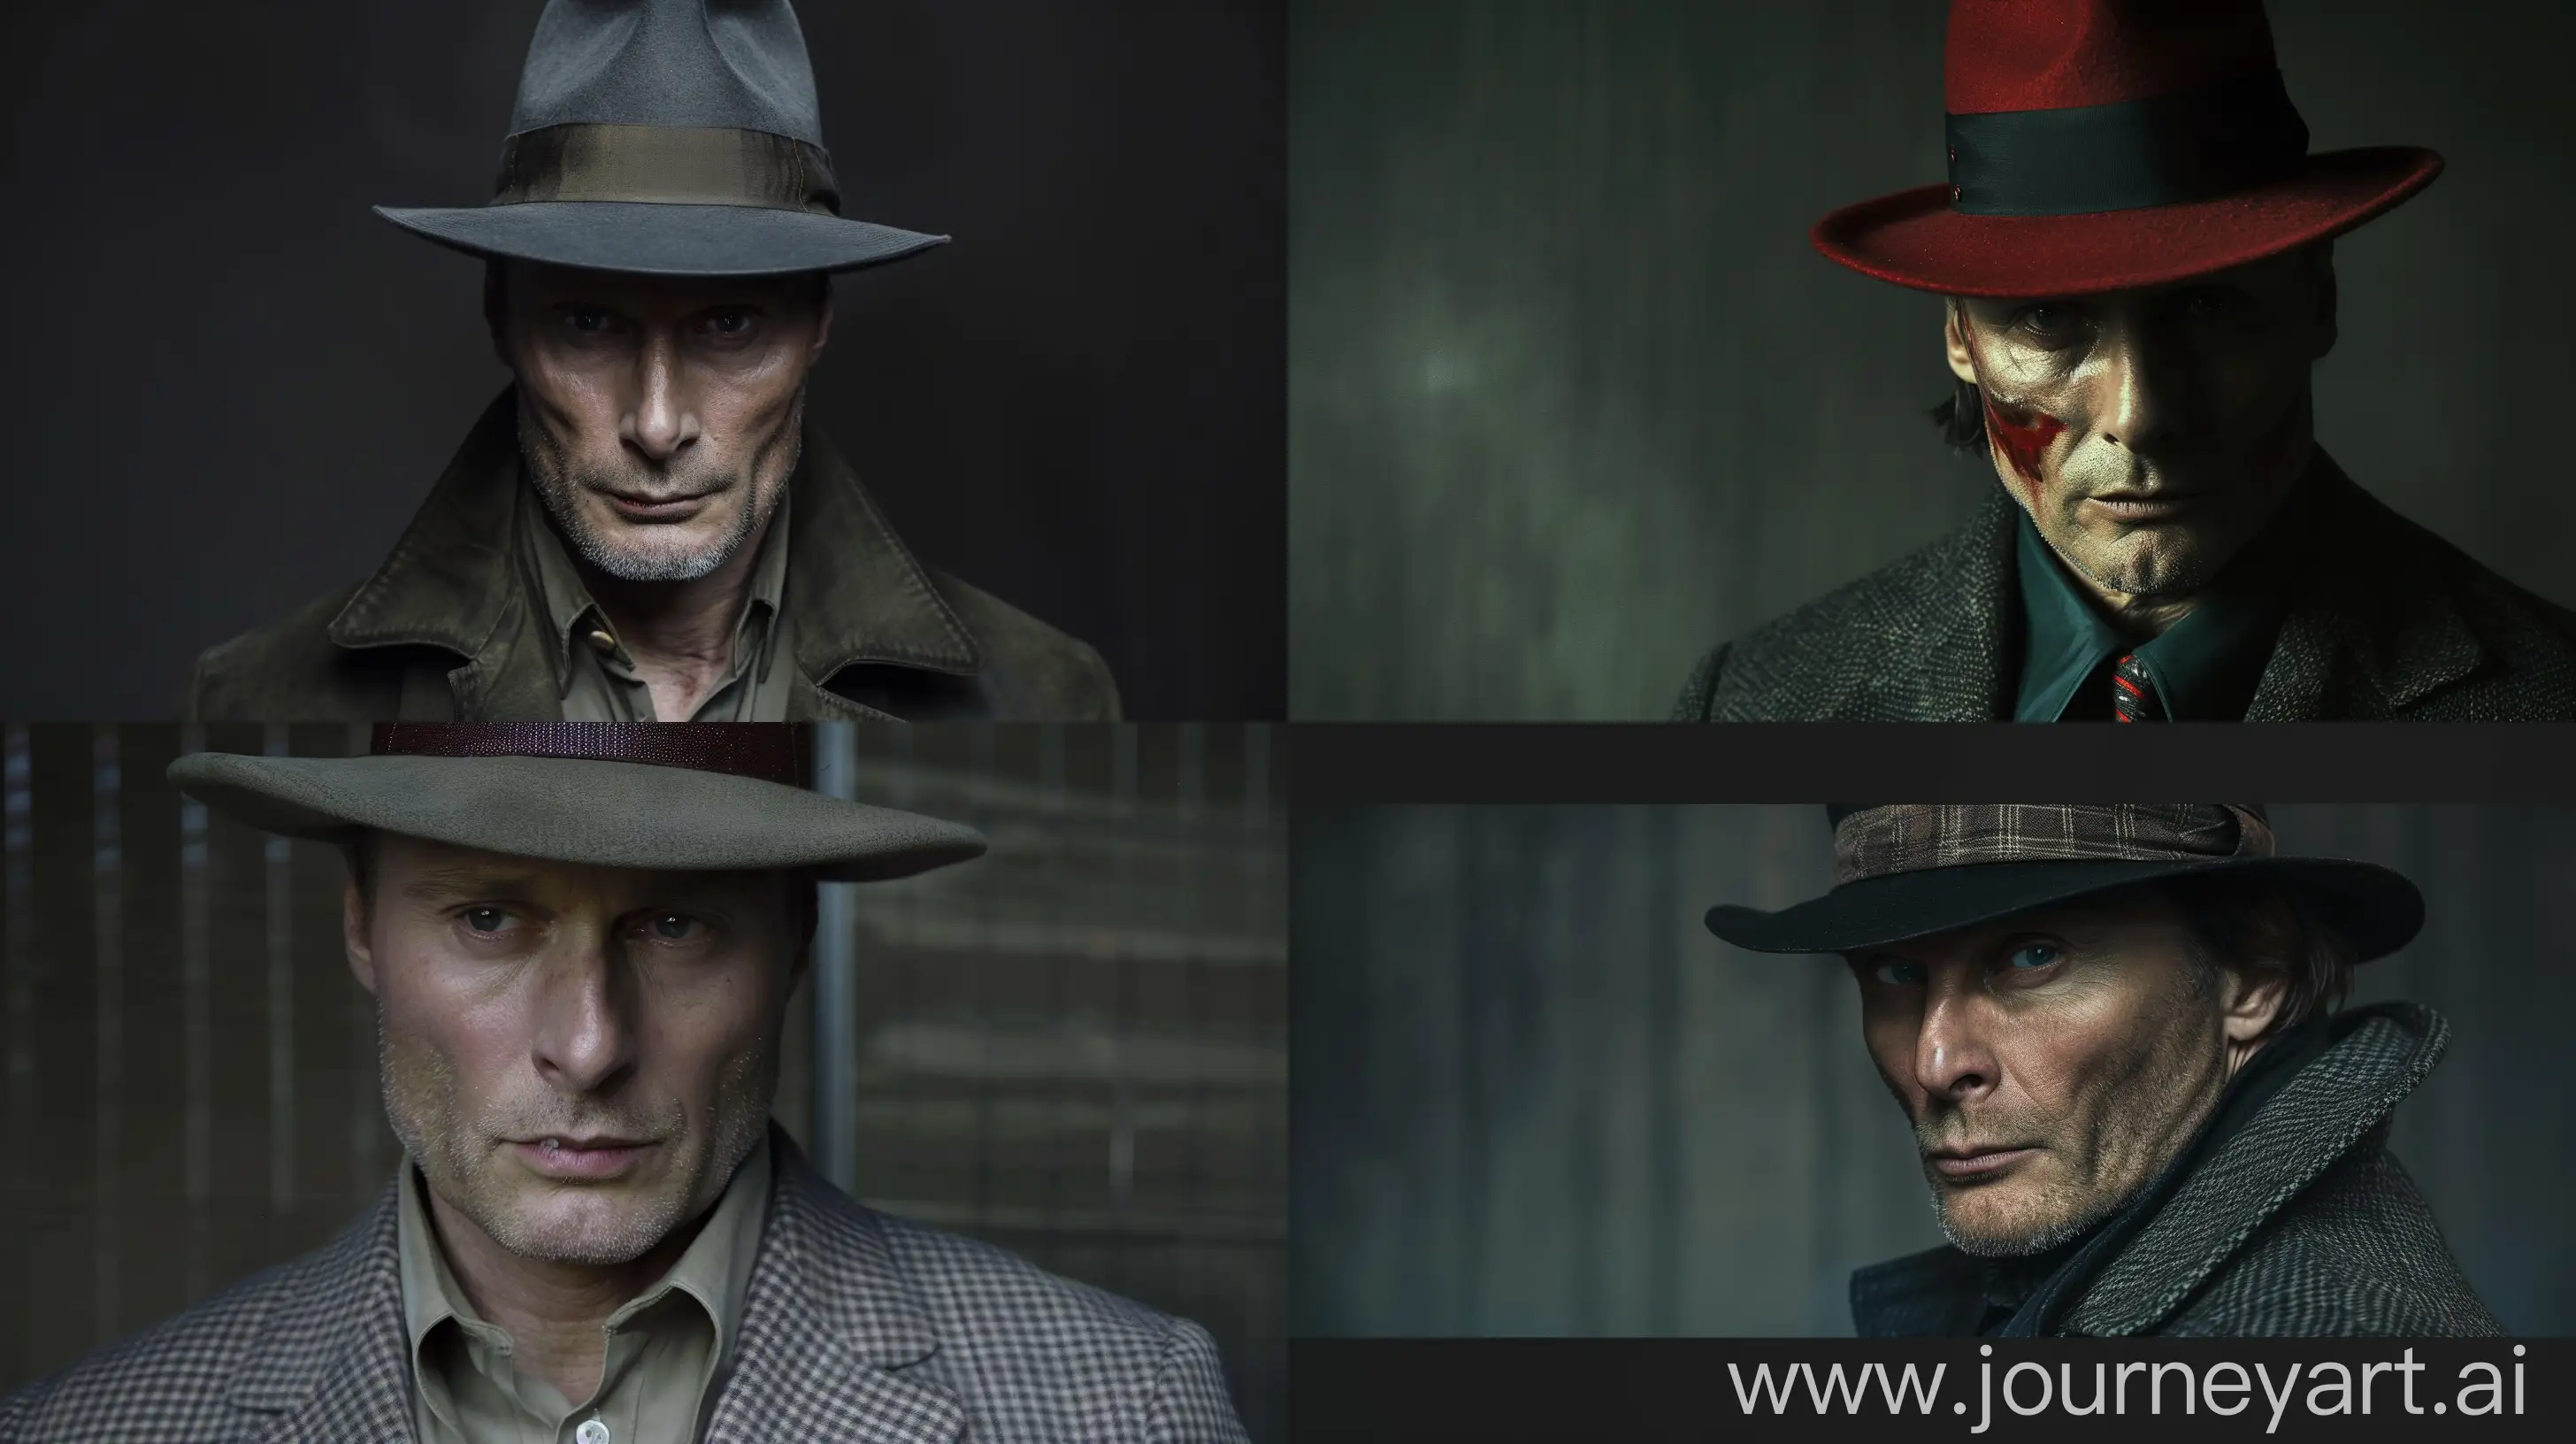 Mads-Mikkelsen-as-Hannibal-Lecter-in-MafiaInspired-Outfit